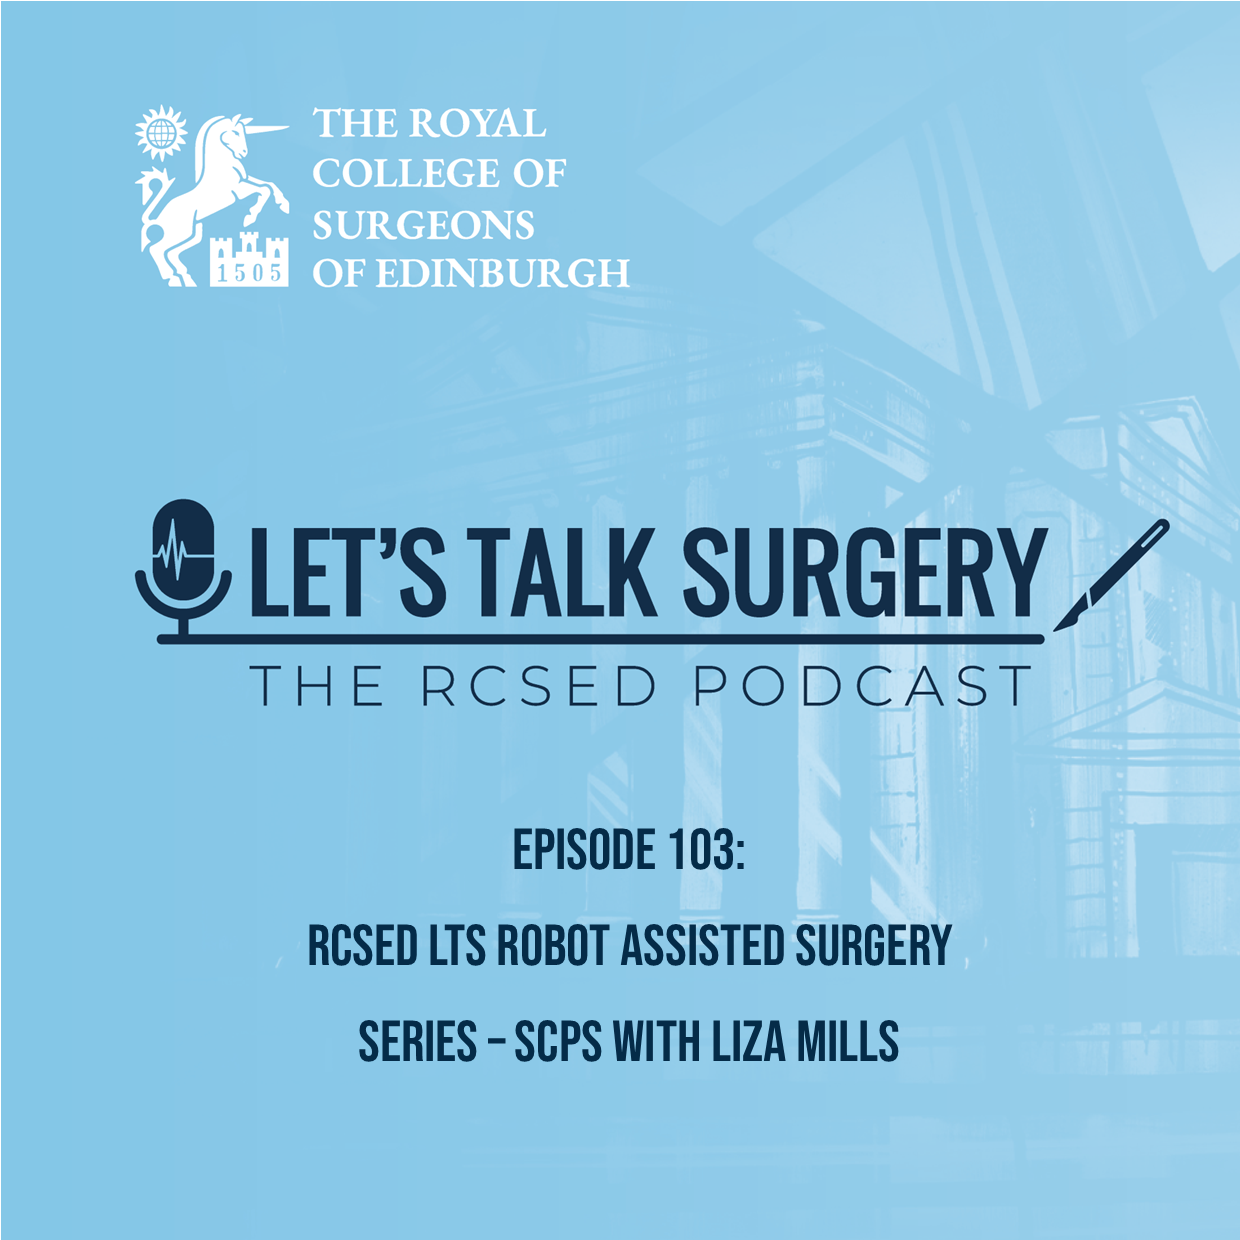 RCSED LTS Robot Assisted Surgery Series – SCPs with Liza Mills